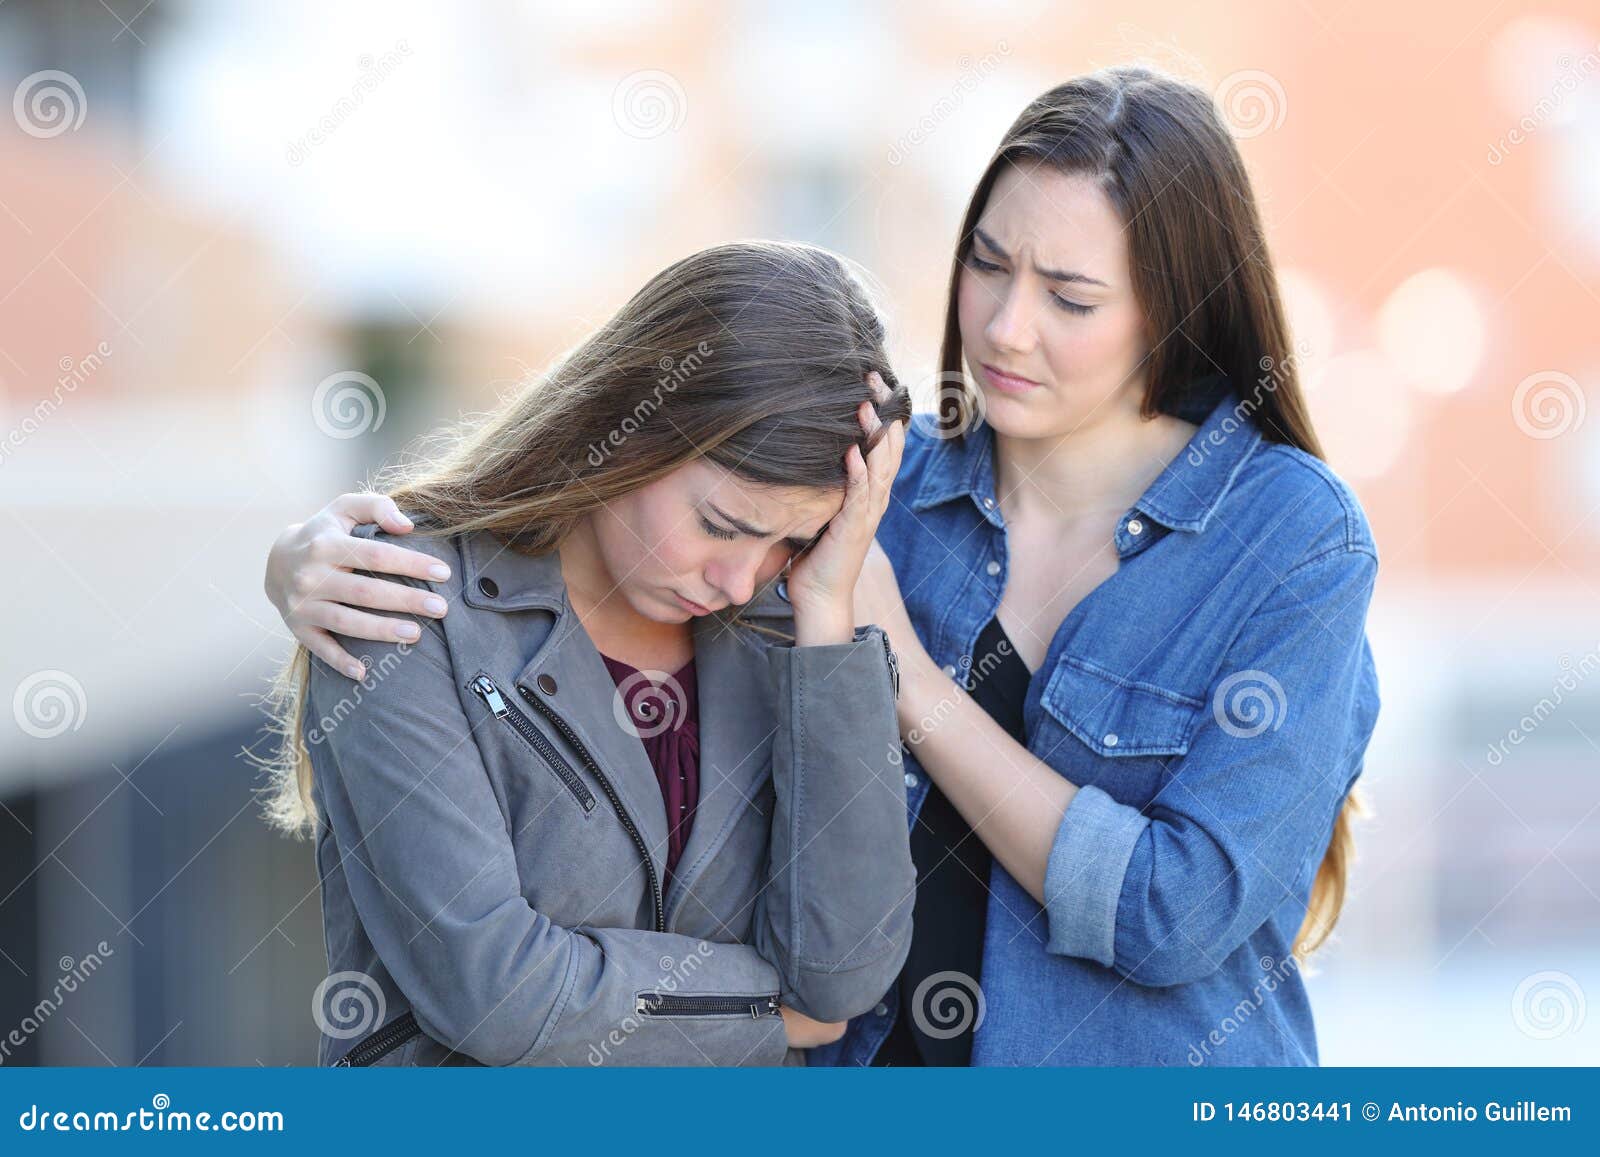 worried woman comforting her sad friend in the street